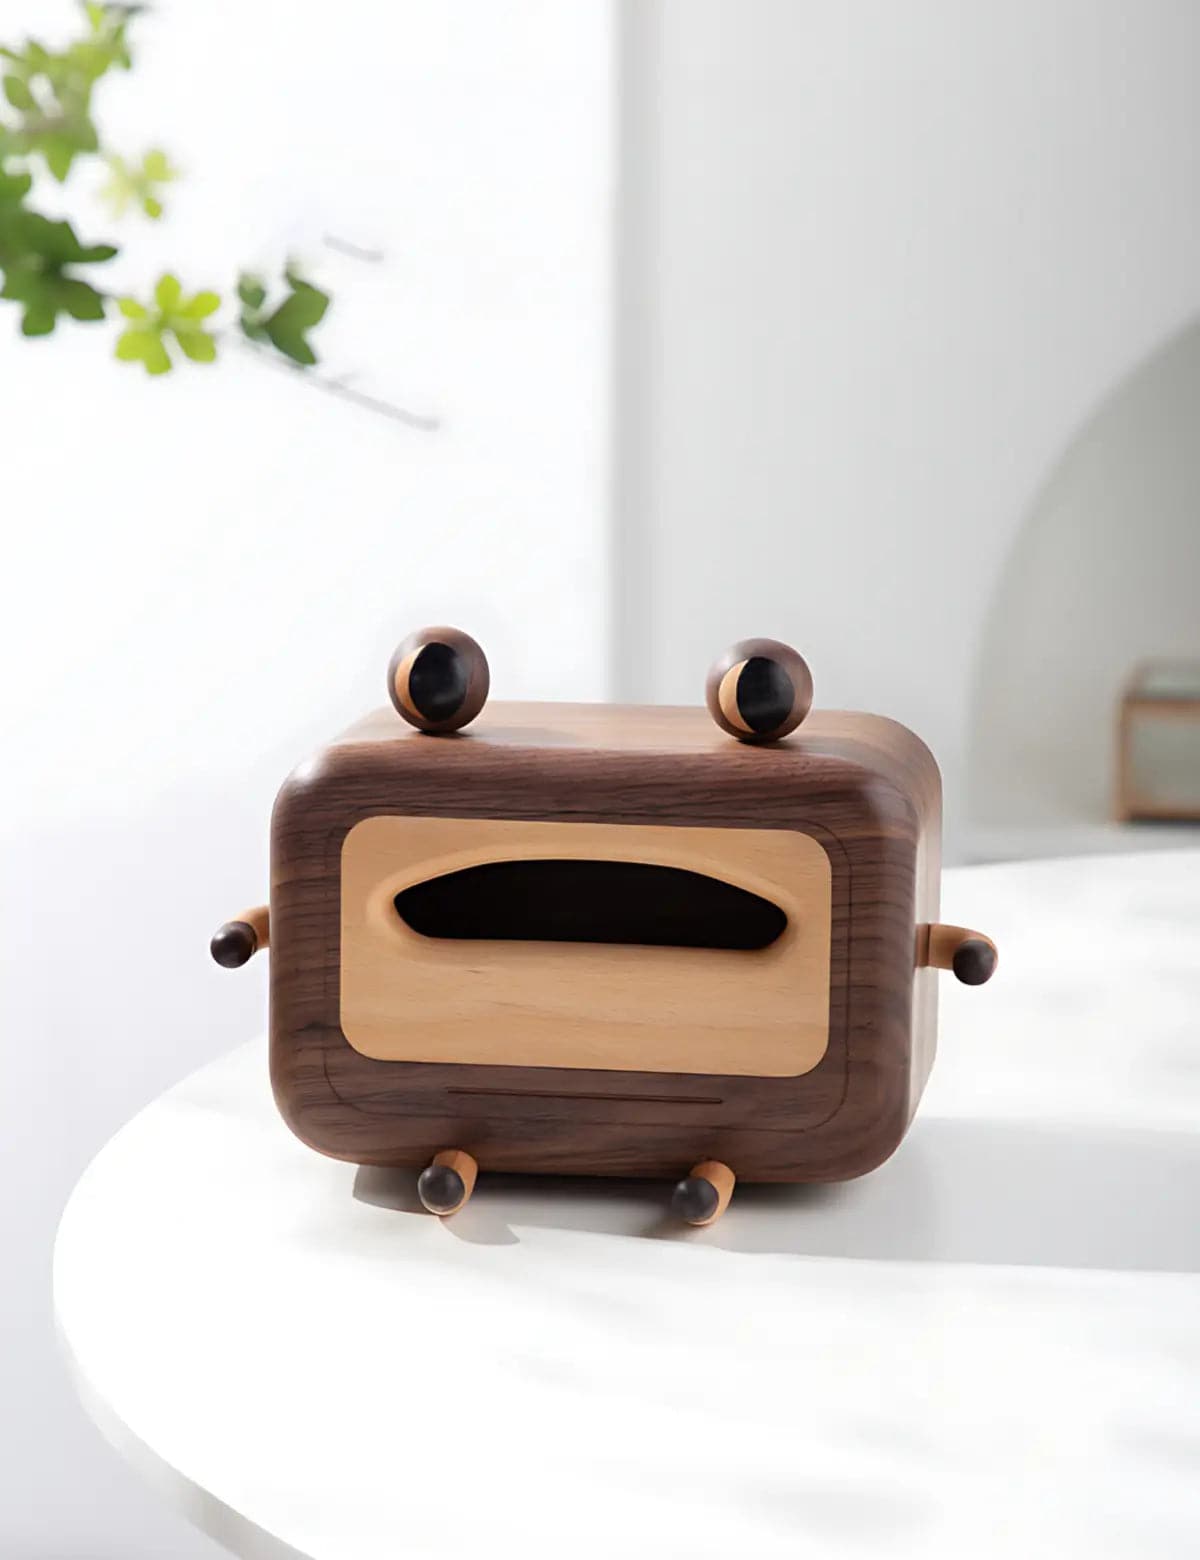 mr-frog-wooden-tissue-box-handcrafted-countertop-decor-07